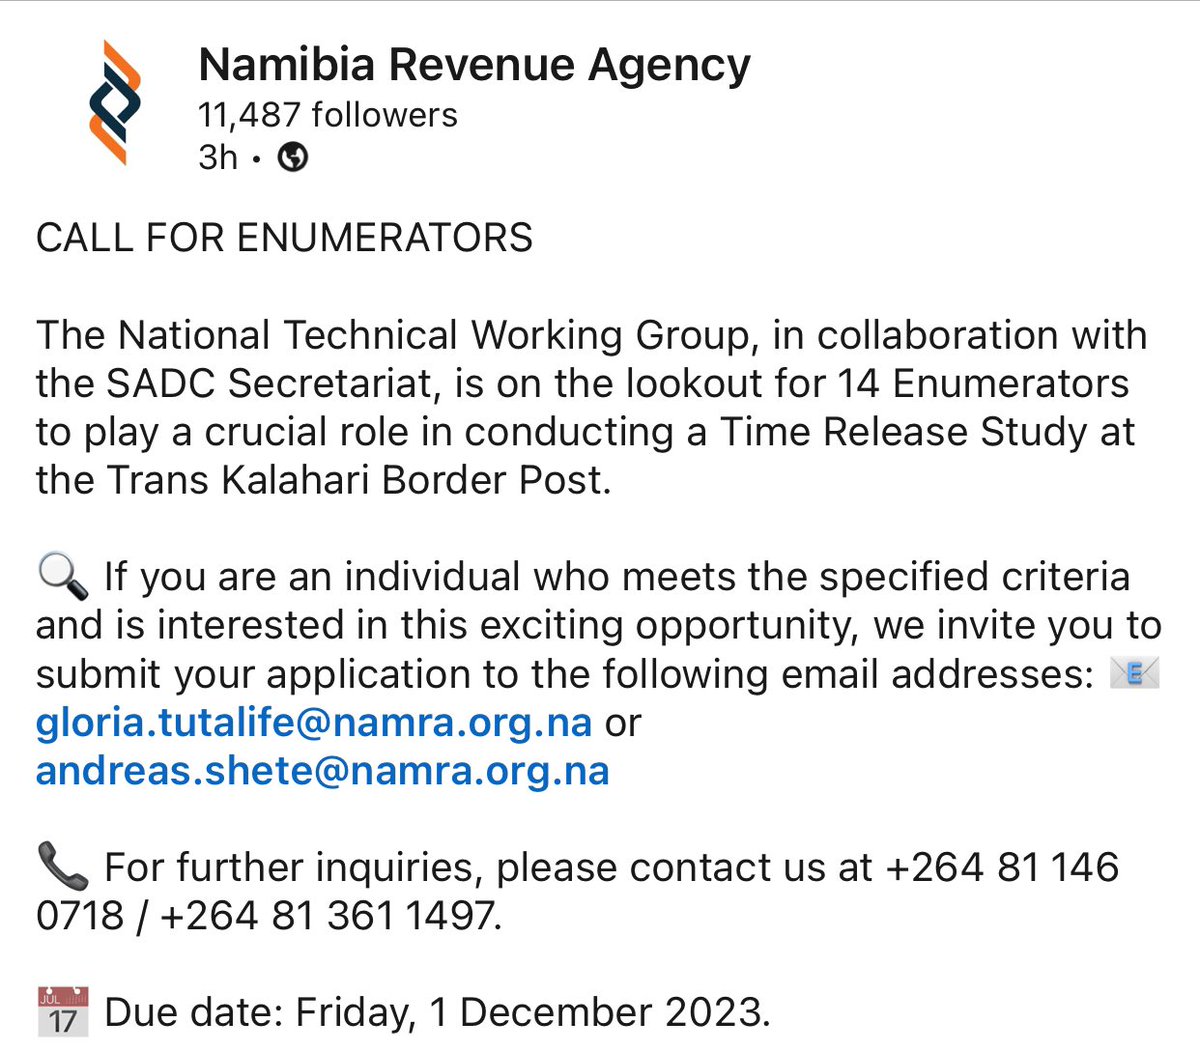 NAMRA: CALL FOR ENUMERATORS 🔍 we invite you to submit your application to the following email addresses: 📧 gloria.tutalife@namra.org.na or andreas.shete@namra.org.na 📞 For further inquiries, contact +264 81 146 0718 / +264 81 361 1497. 📅 Due Friday, 1 December 2023.